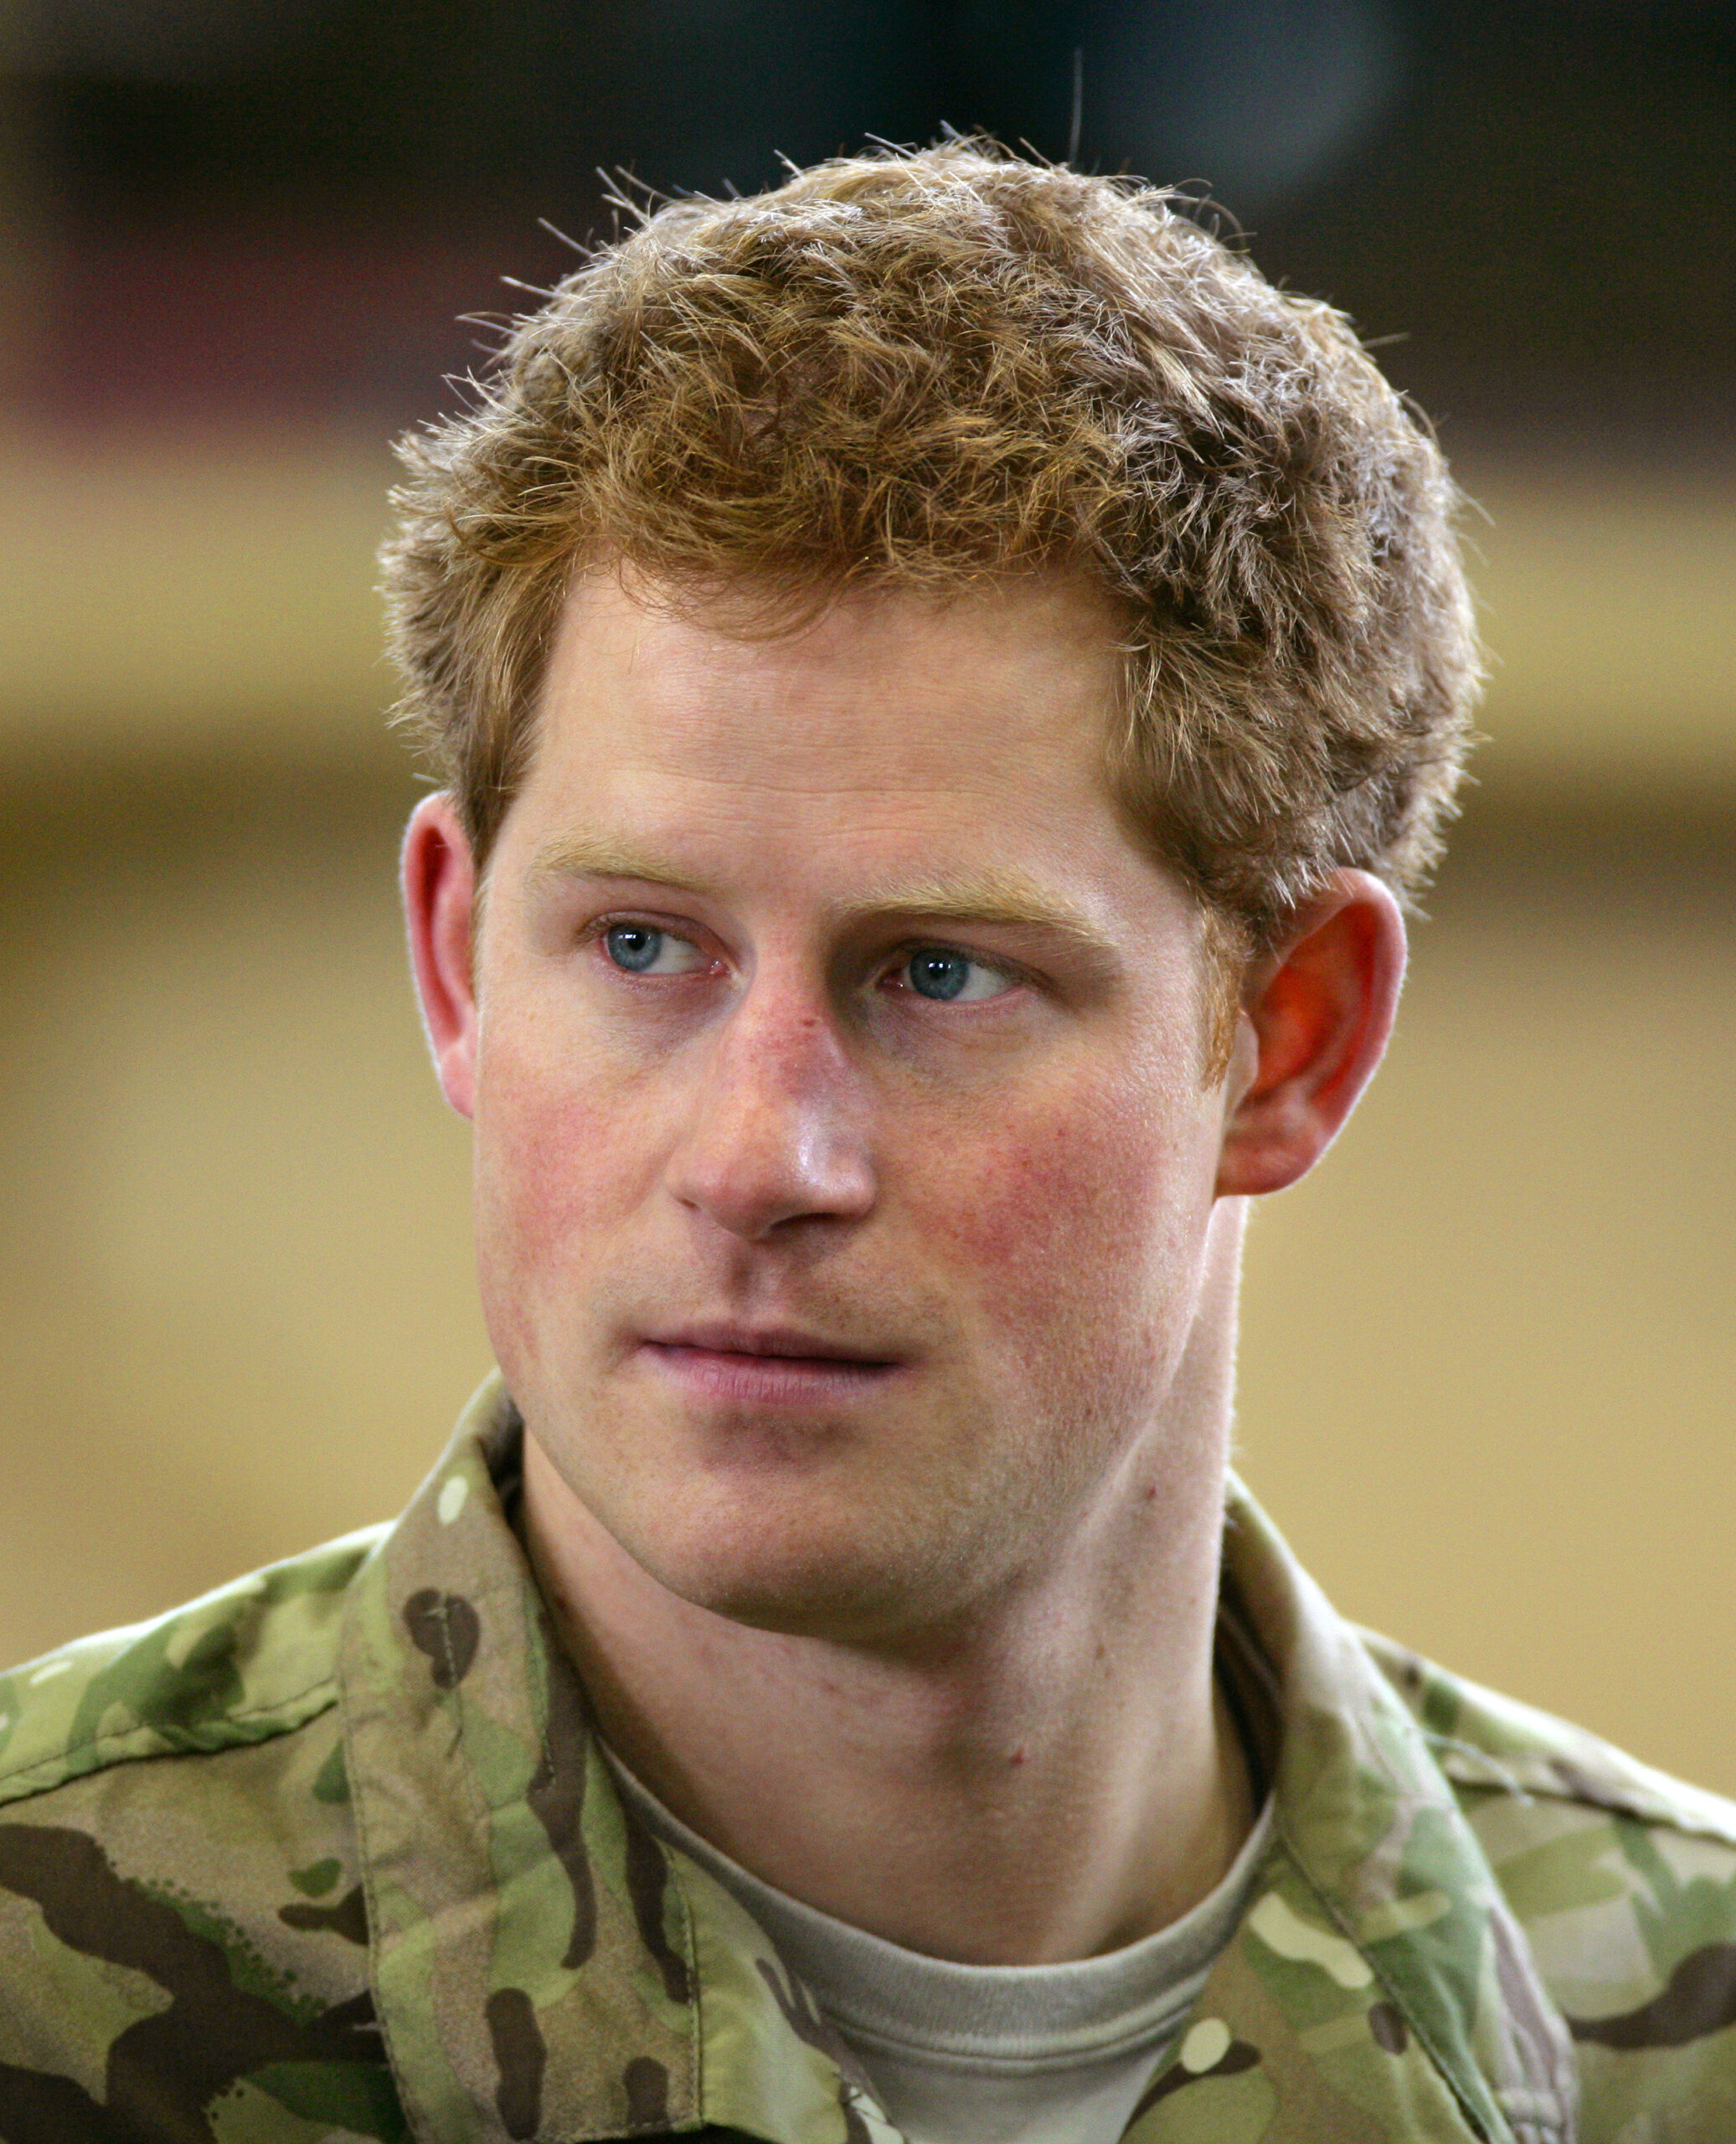 Prince Harry says the army saved him